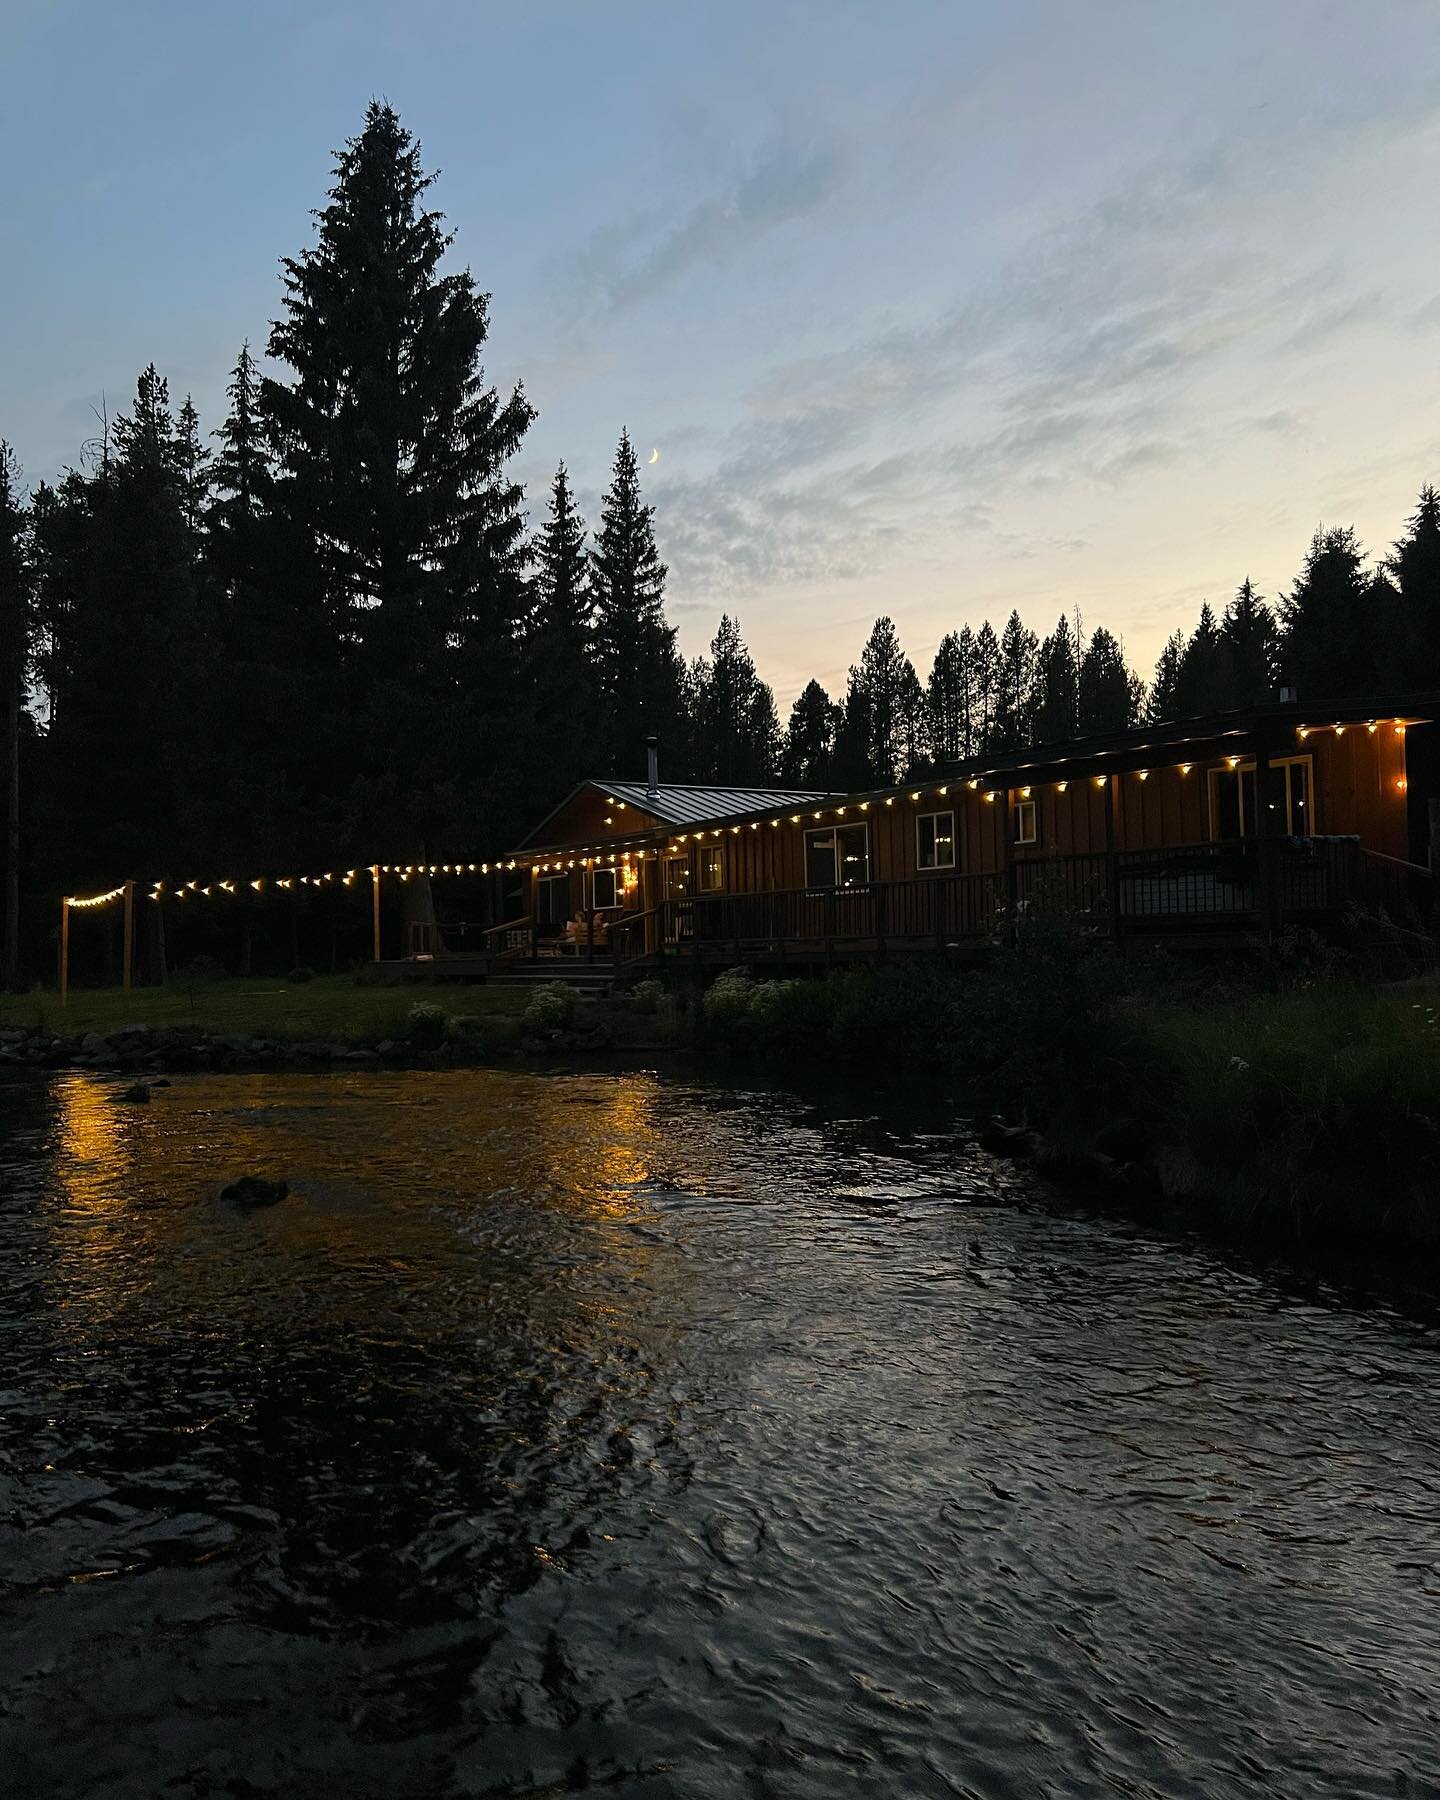 We&rsquo;ve had guests most of July at the Pine Path Cabin, but we&rsquo;re getting a special long weekend with family at the cabin.

@ryndrws
#cabin&nbsp;#cabinlife&nbsp;#cabininthewoods&nbsp;#cabincrew&nbsp;#vacationrental&nbsp;#vacationrentals&nbs